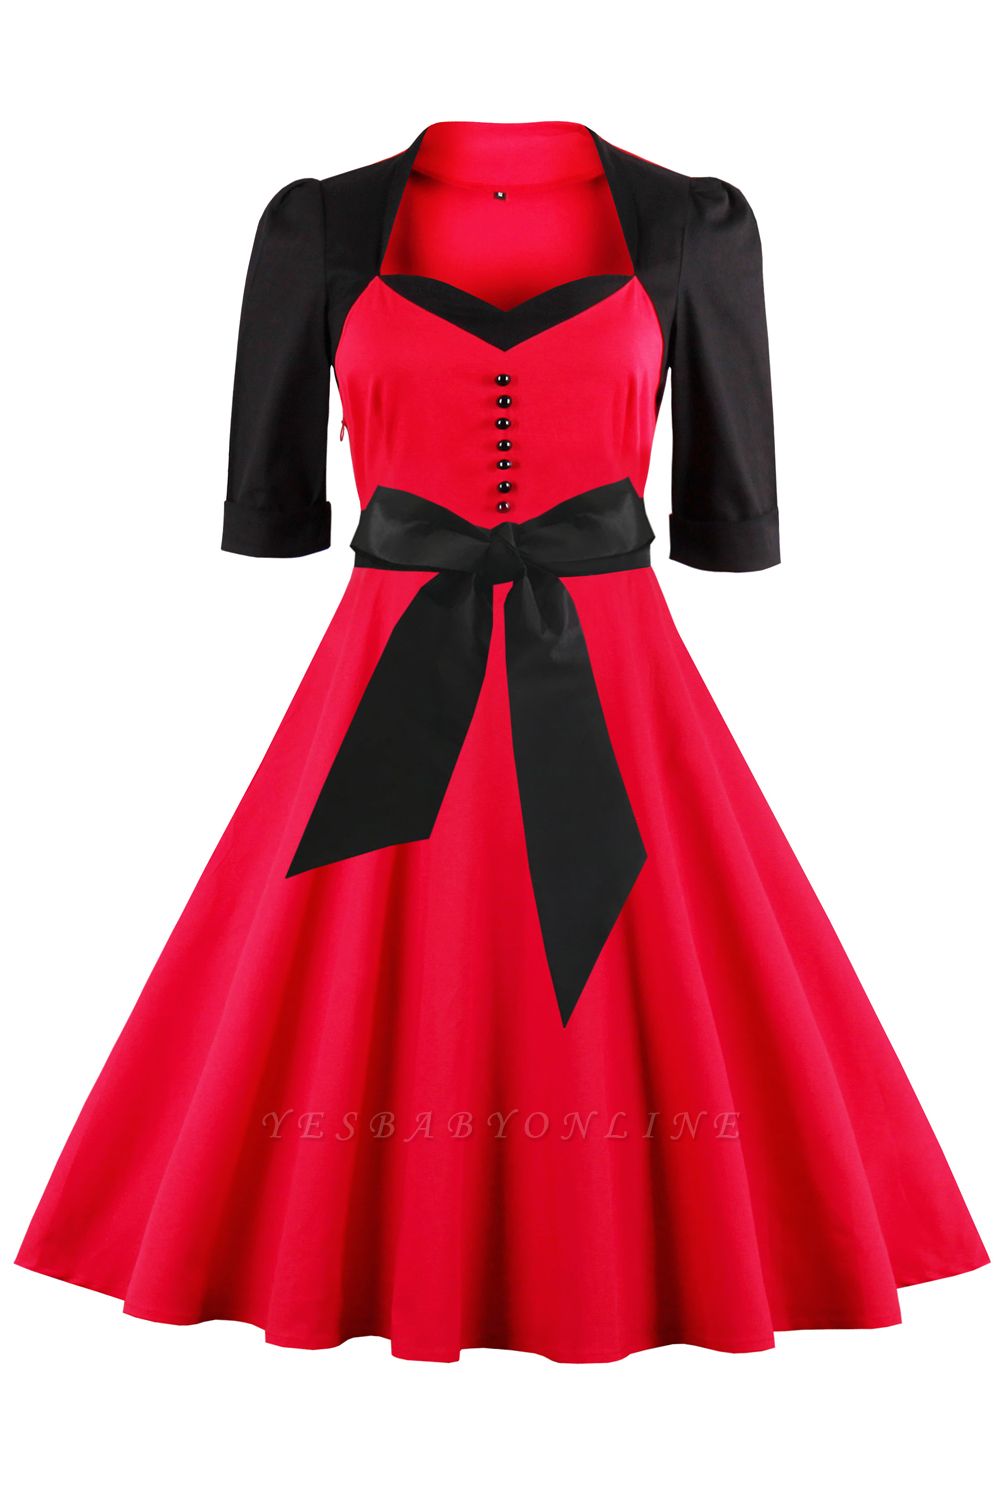 1/2 Sleeve 1950S Red and Black Retro Dress